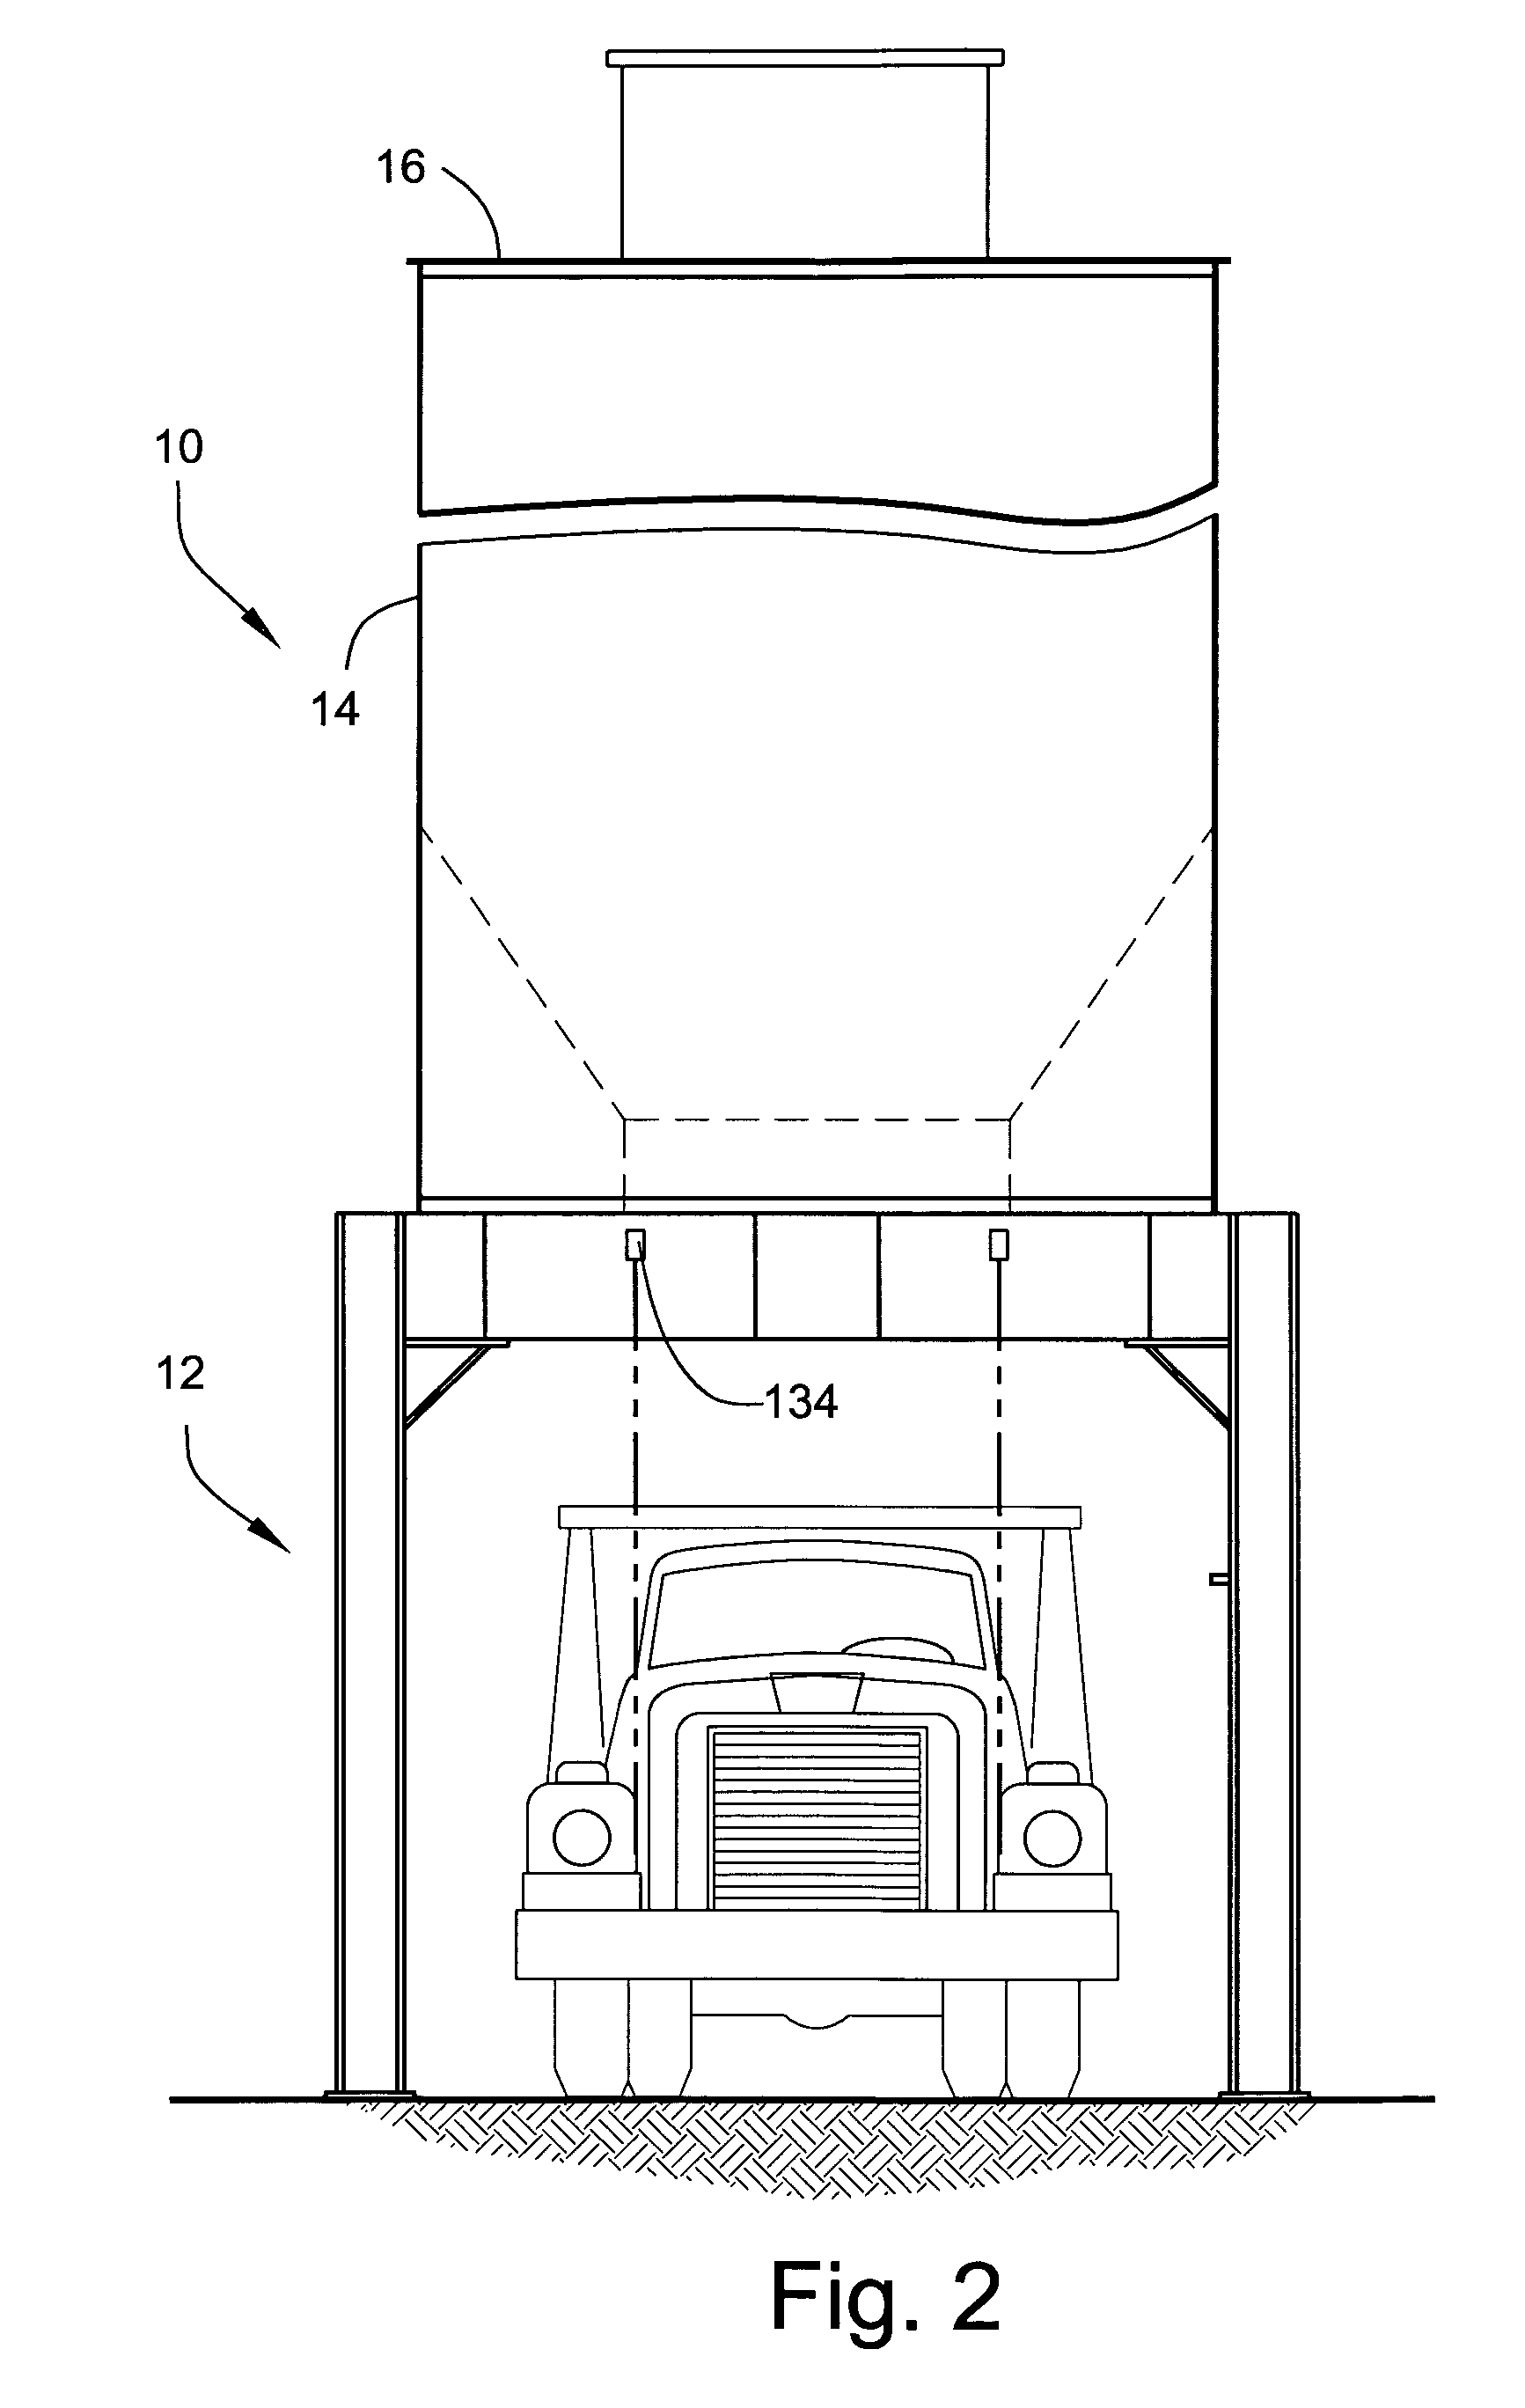 Apparatus and methods for discharging particulate material from storage silos